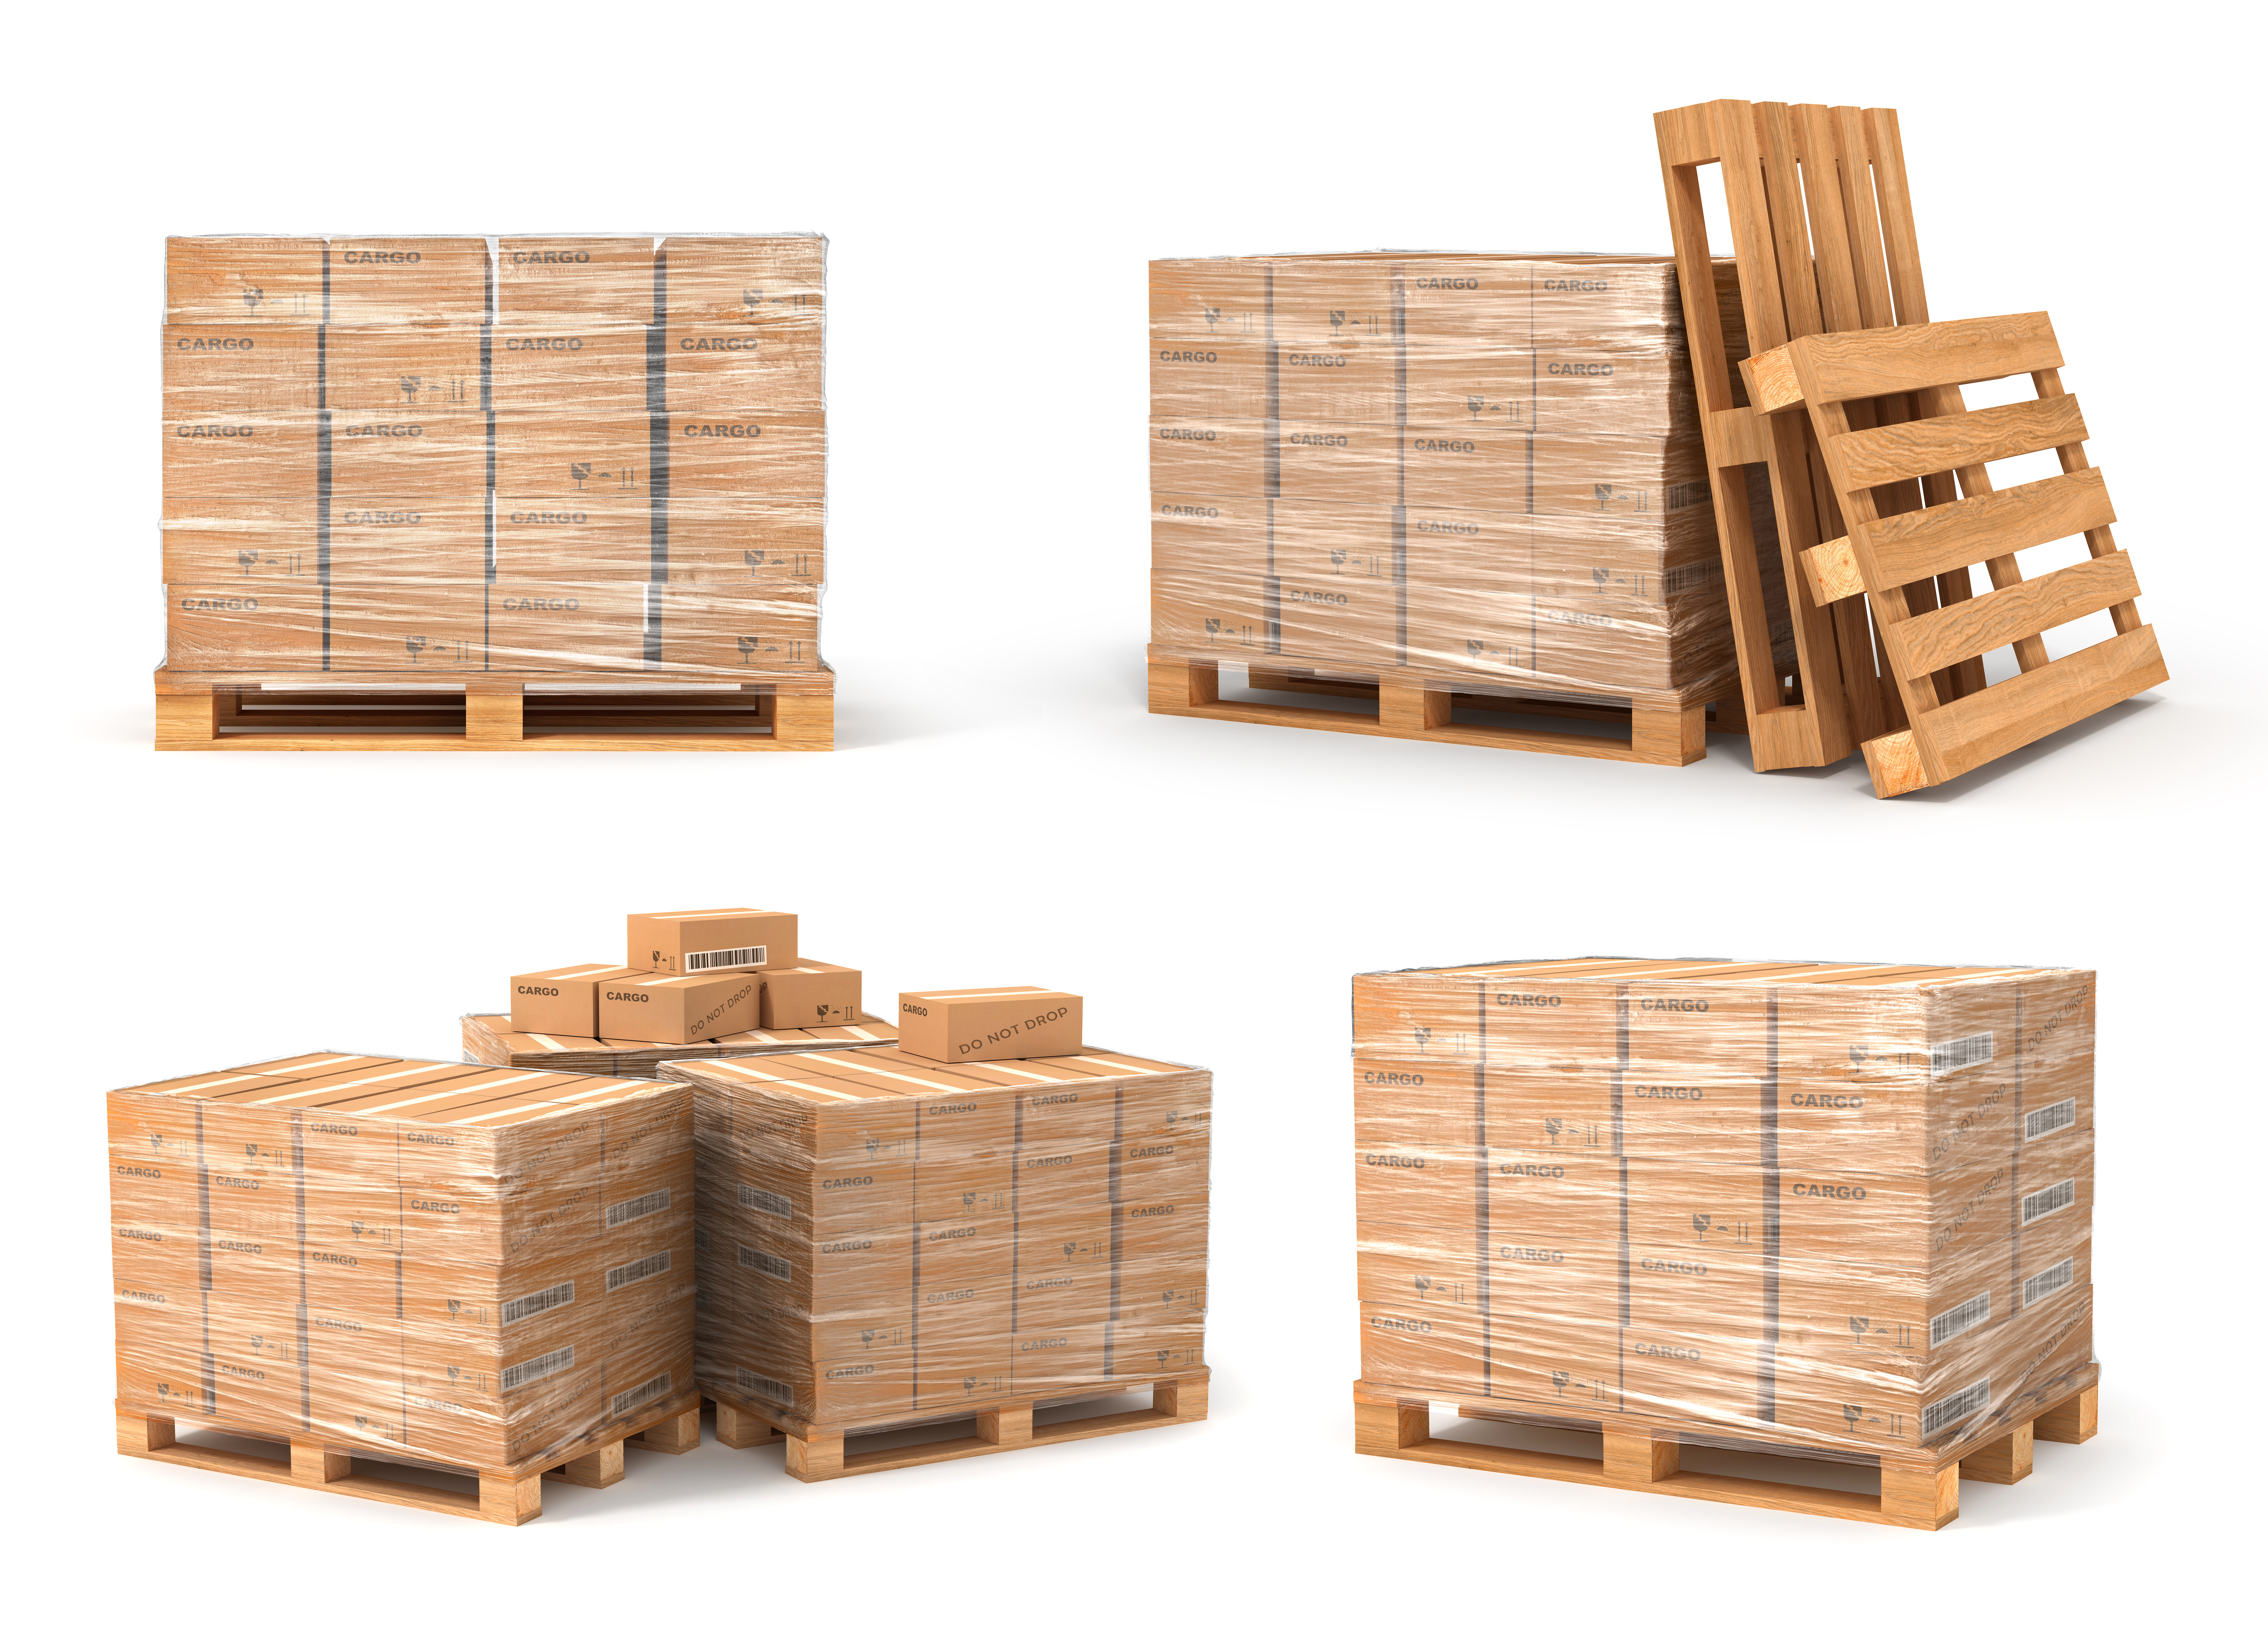 Packages on a wooden pallet